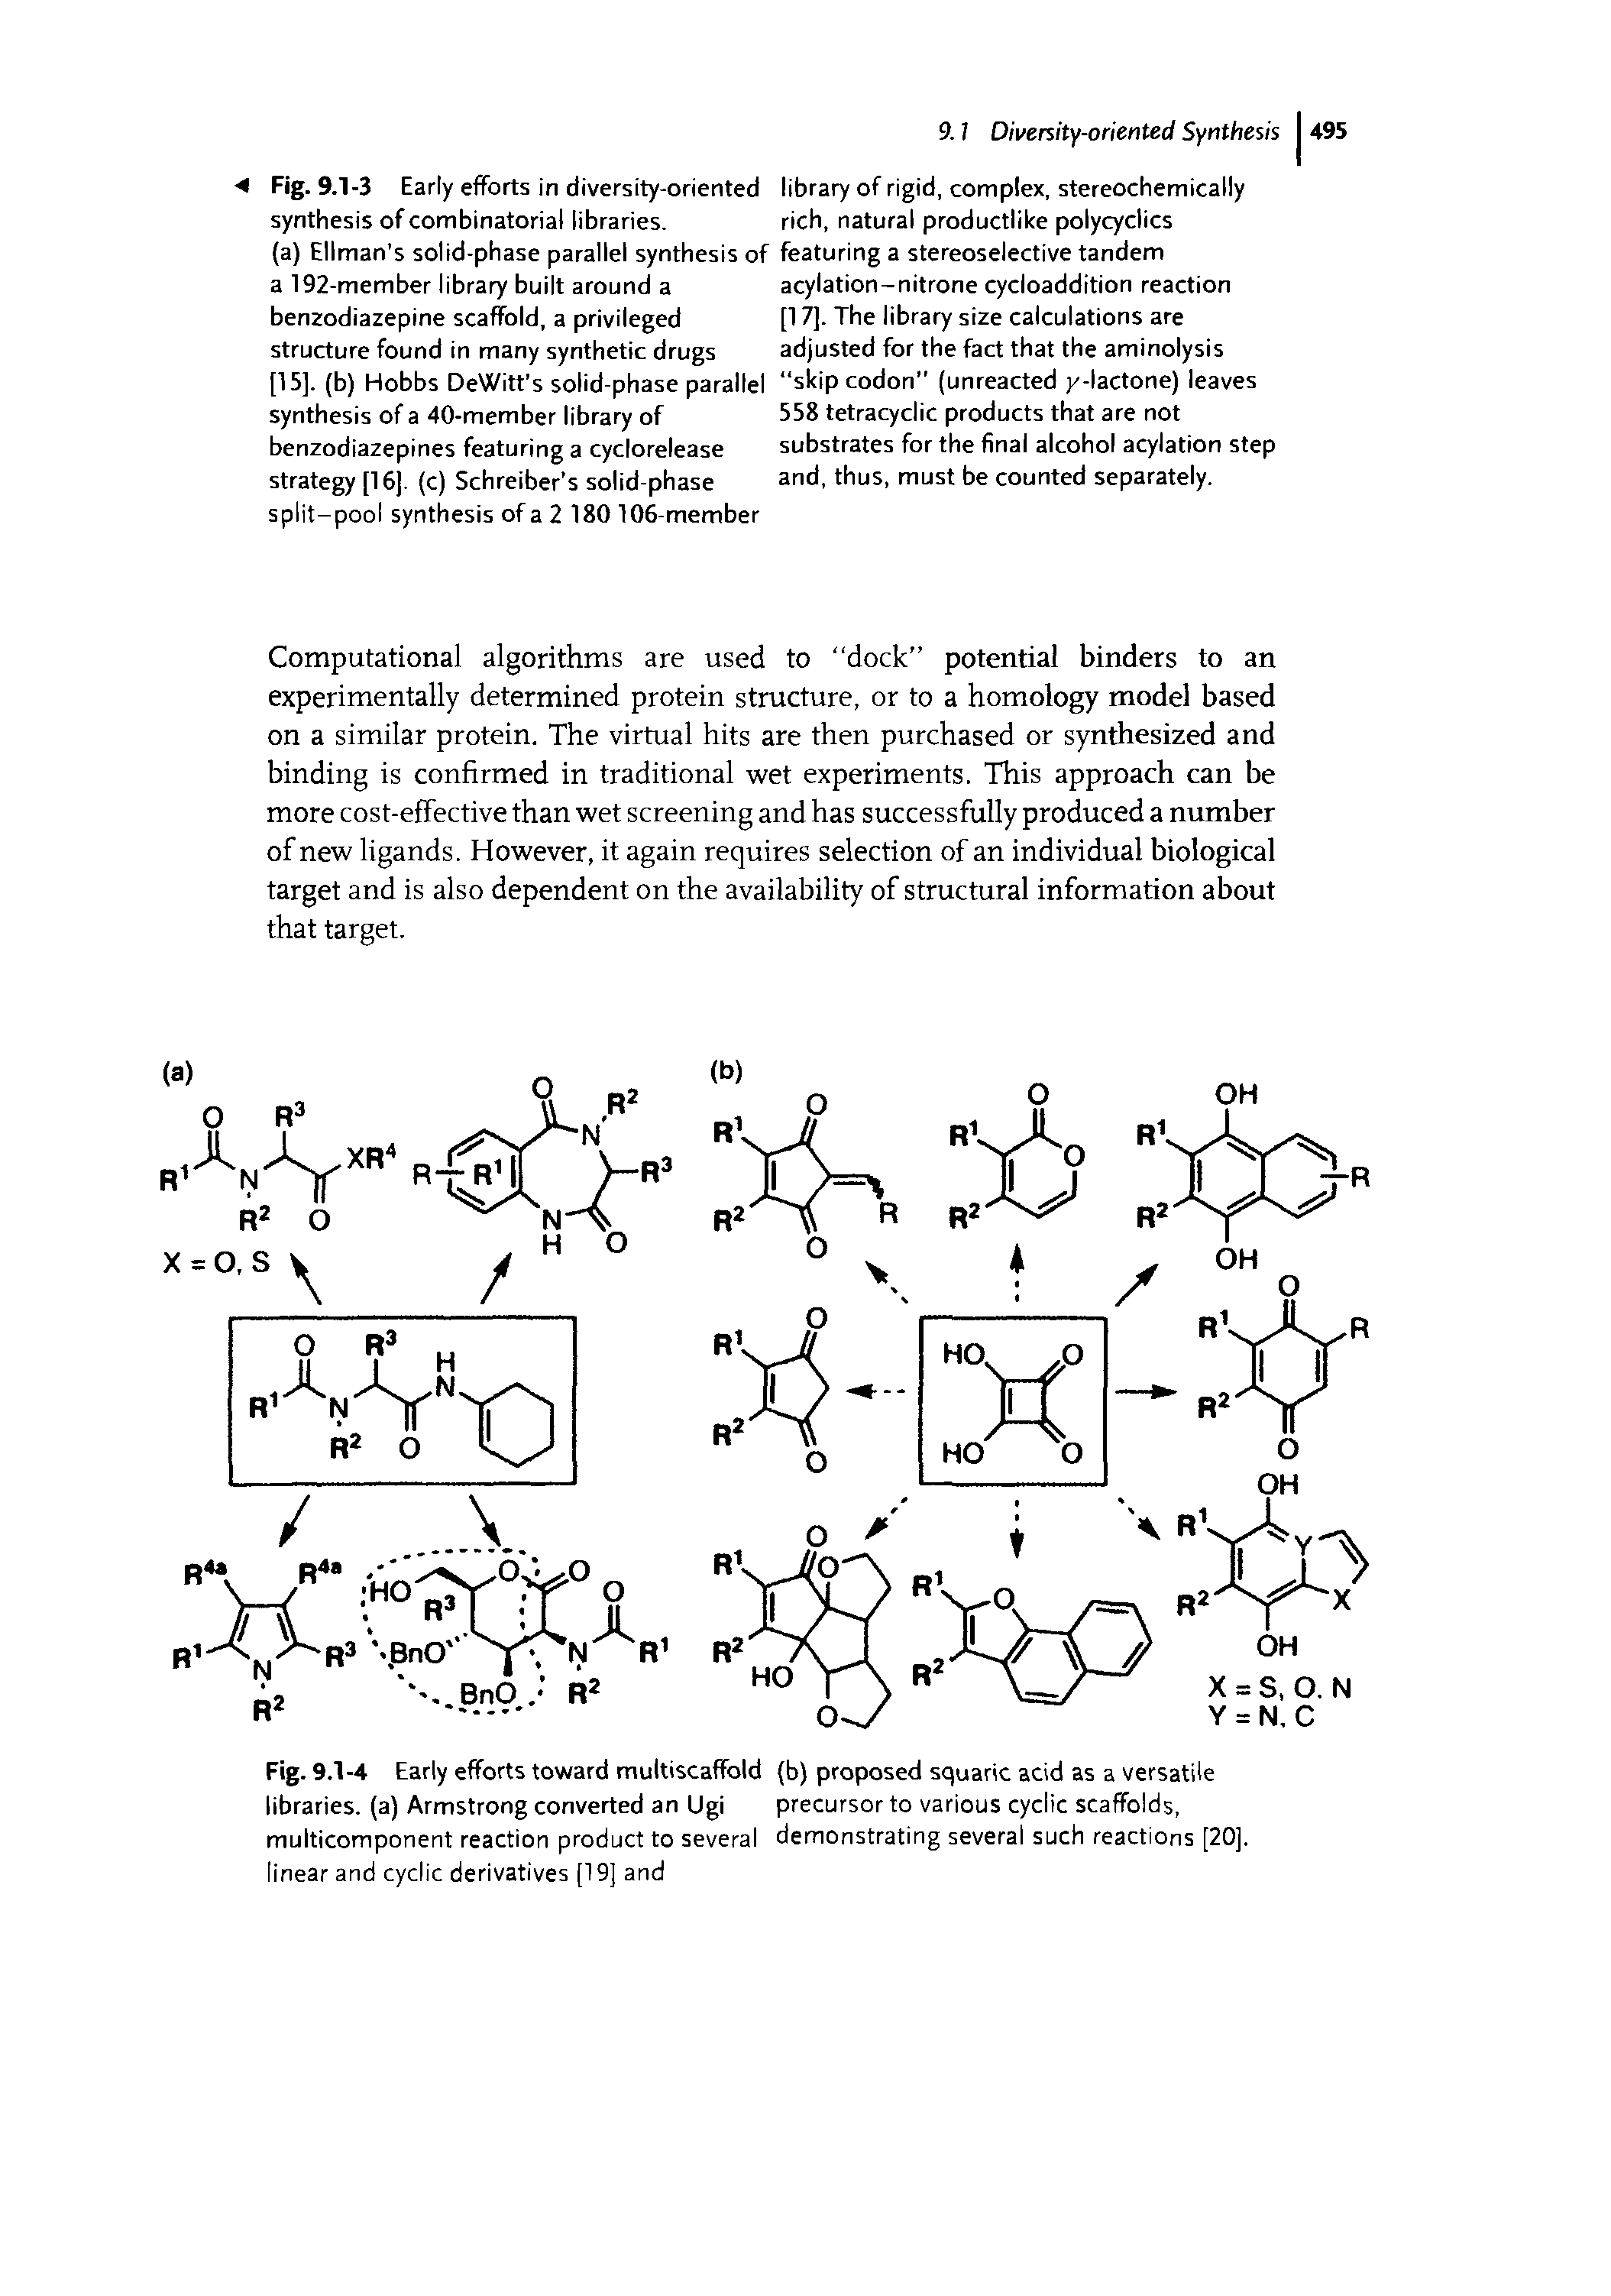 Fig. 9.1-4 Early efforts toward multiscaffold (b) proposed squaric acid as a versatile libraries, (a) Armstrong converted an Ugi precursor to various cyclic scaffolds, multicomponent reaction product to several demonstrating several such reactions [20], linear and cyclic derivatives [19] and...